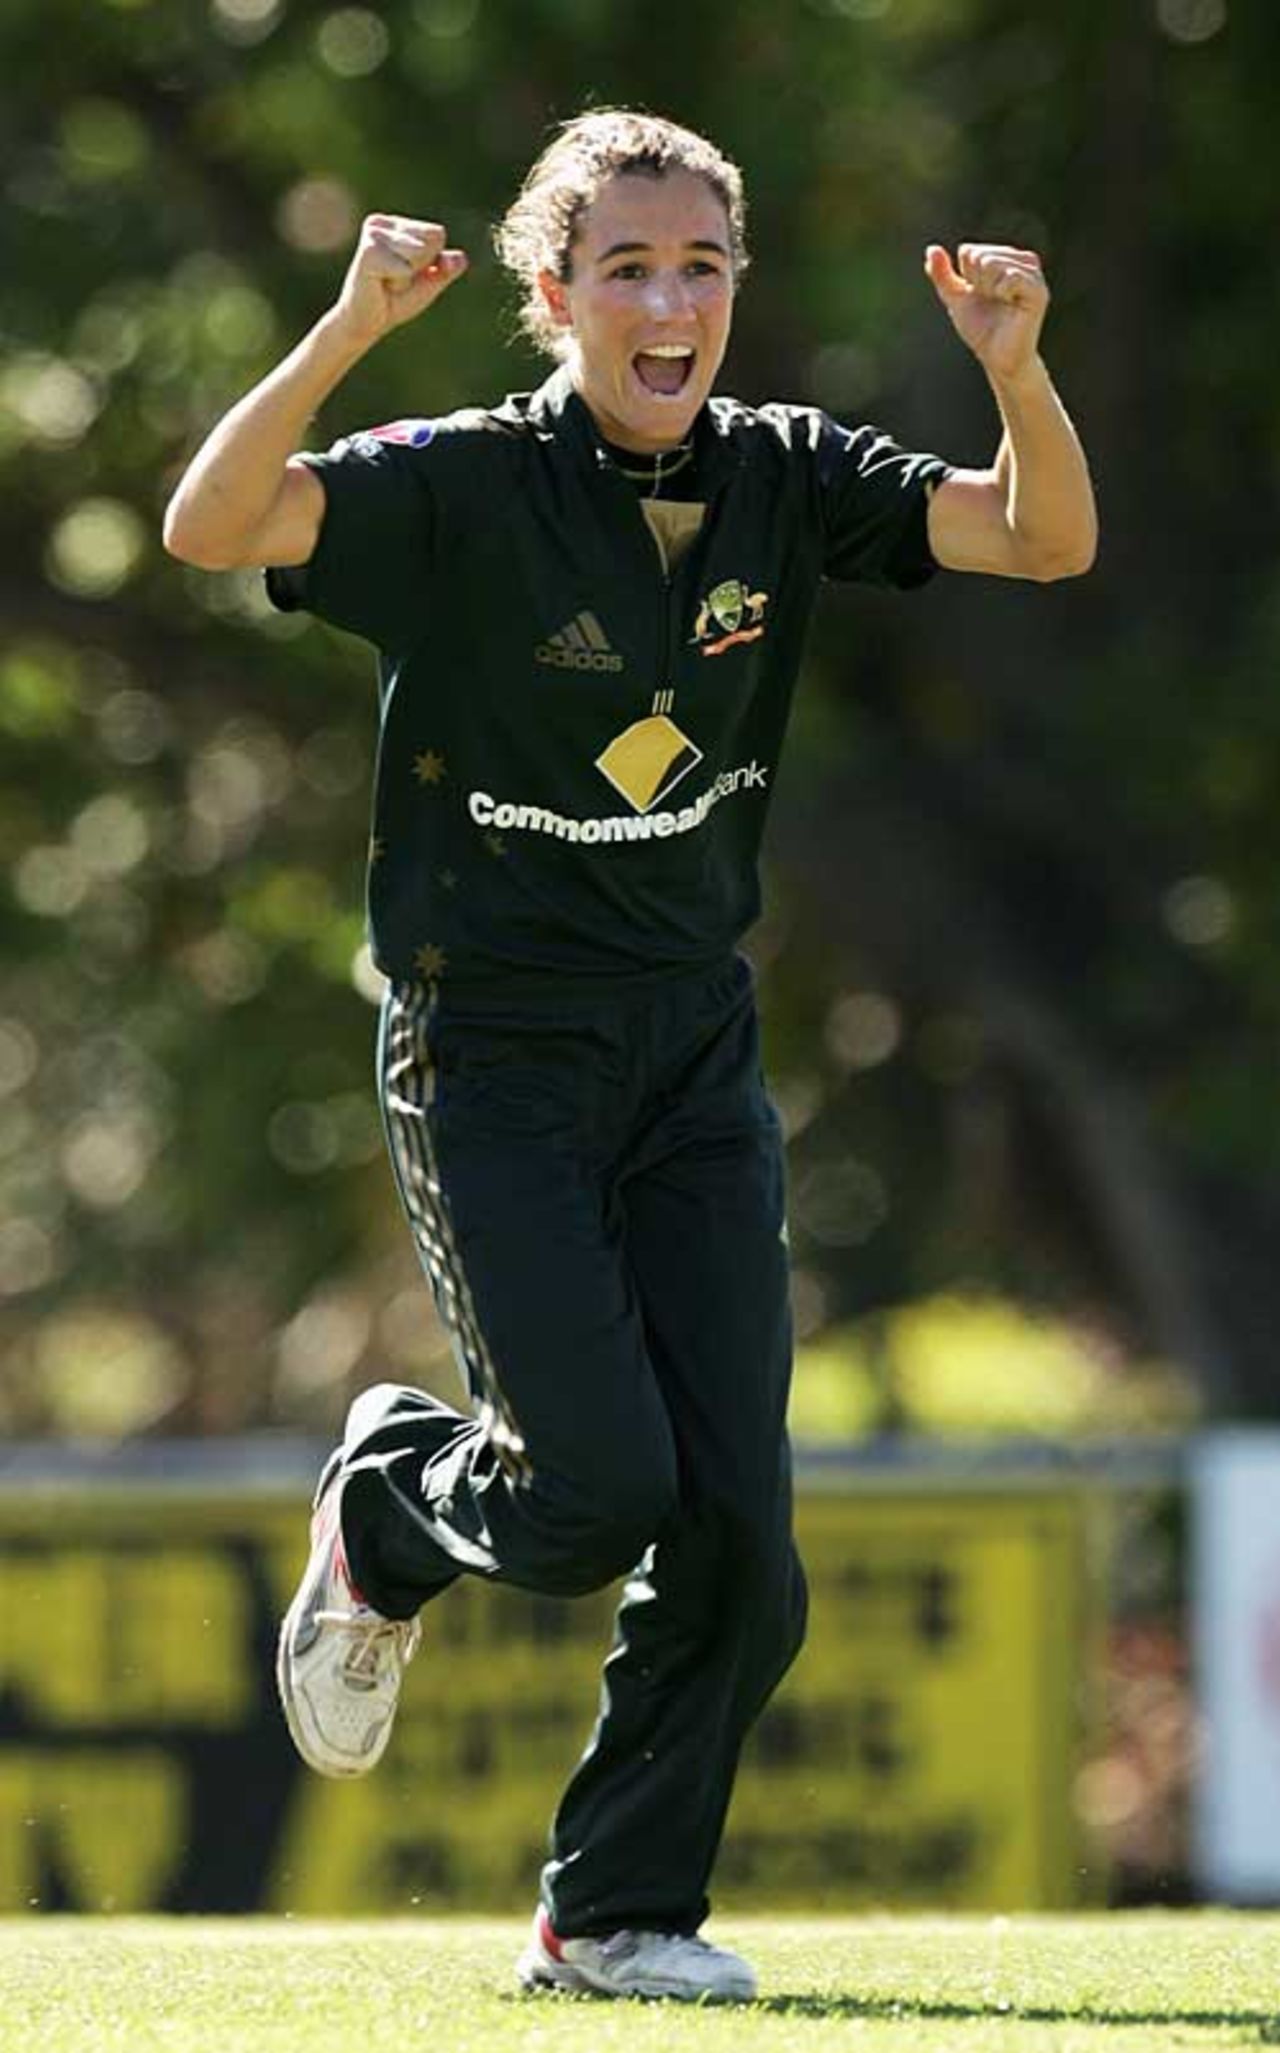 Sarah Andrews took two wickets as Australia eased to victory against New Zealand, Australia women v New Zealand women, 1st ODI, Darwin, July 21, 2007